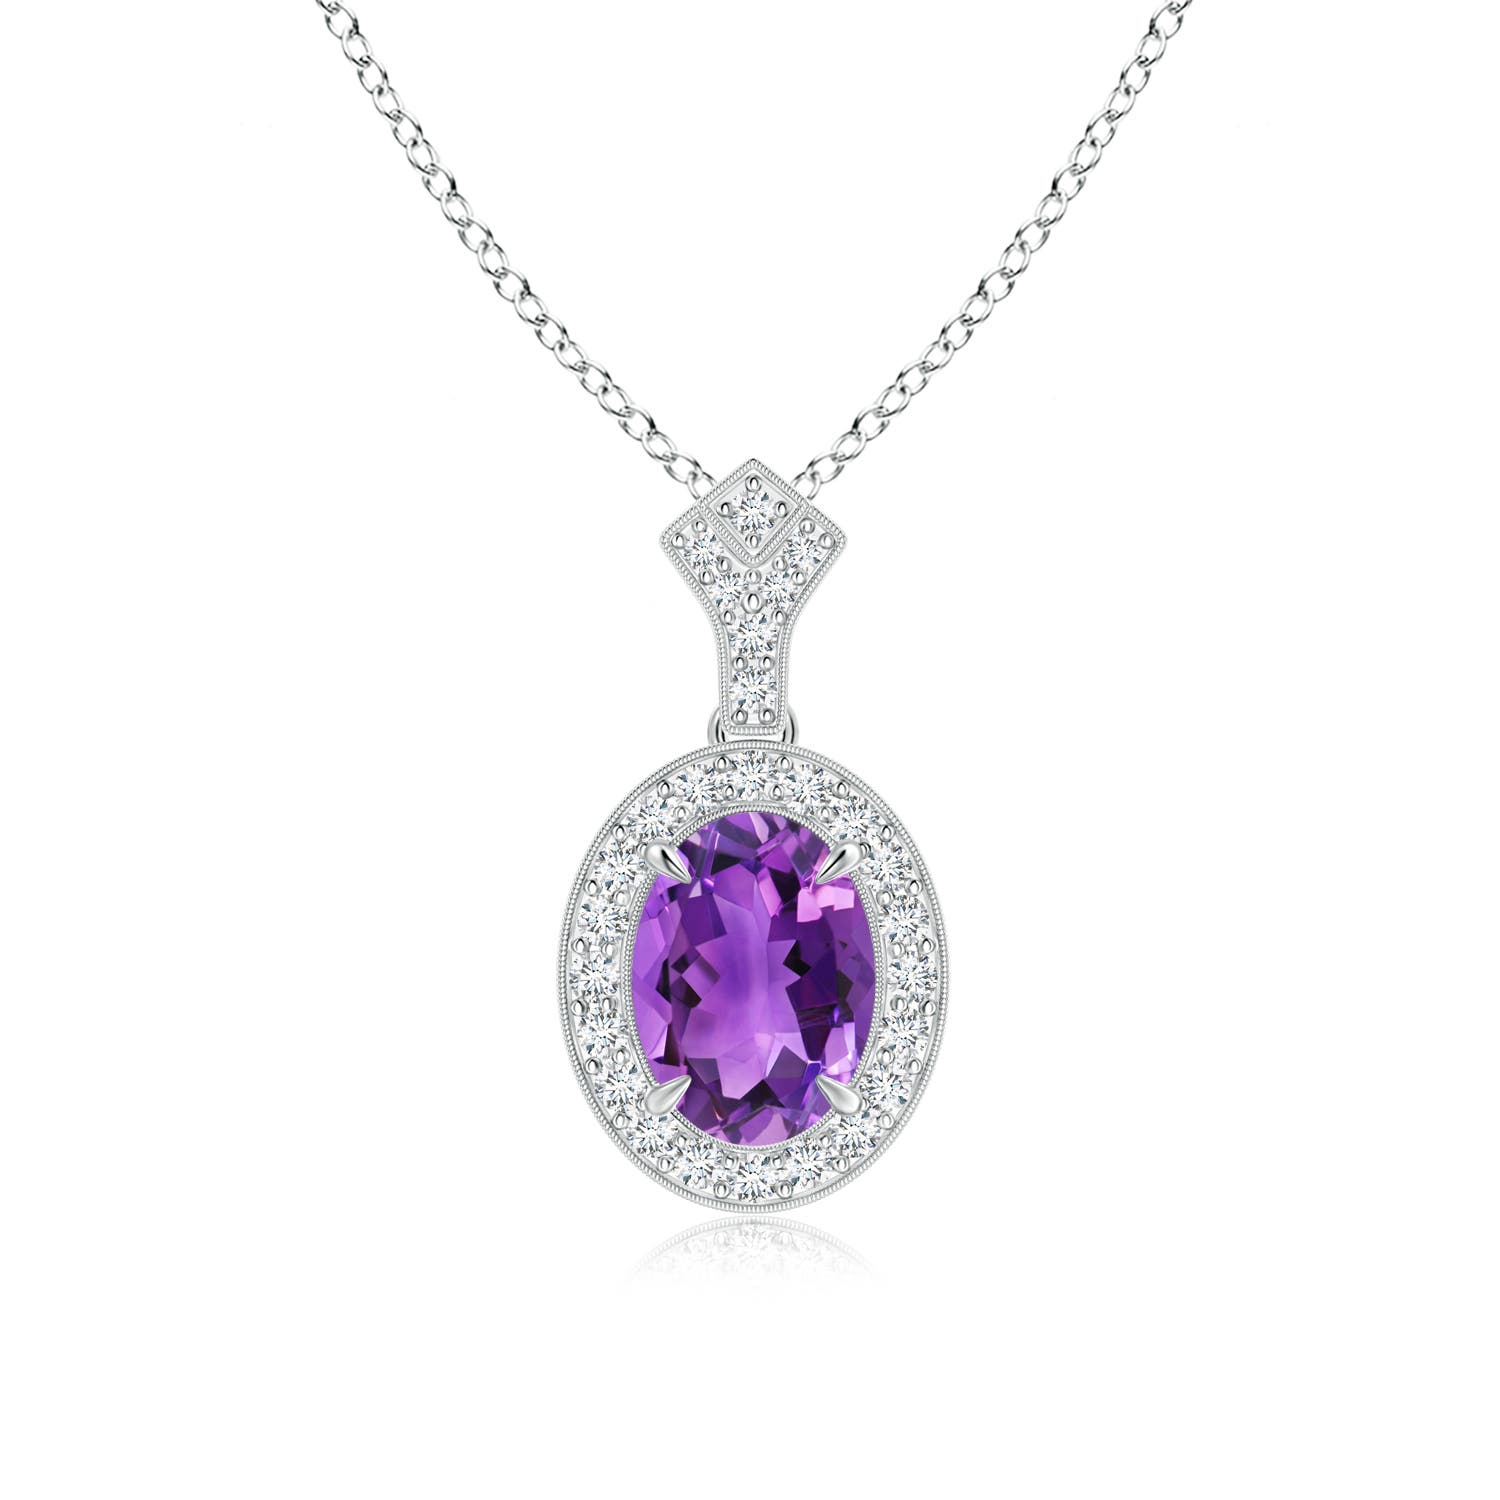 AAA - Amethyst / 1.79 CT / 14 KT White Gold